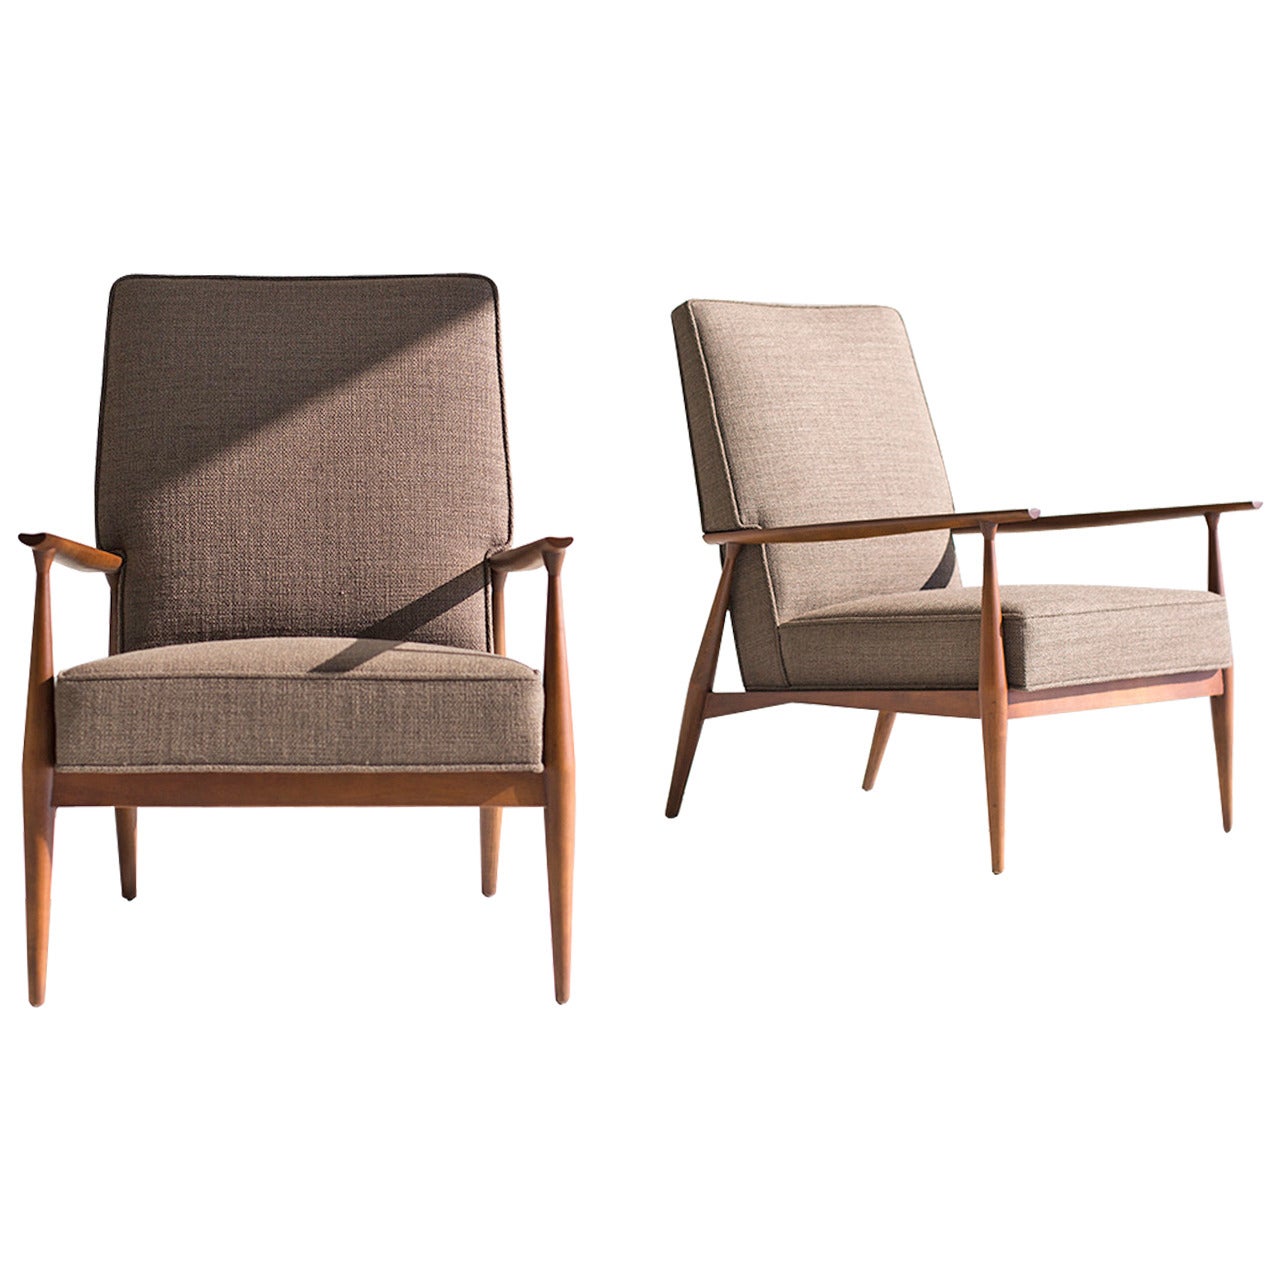 Paul McCobb Arm Lounge Chairs for Directional